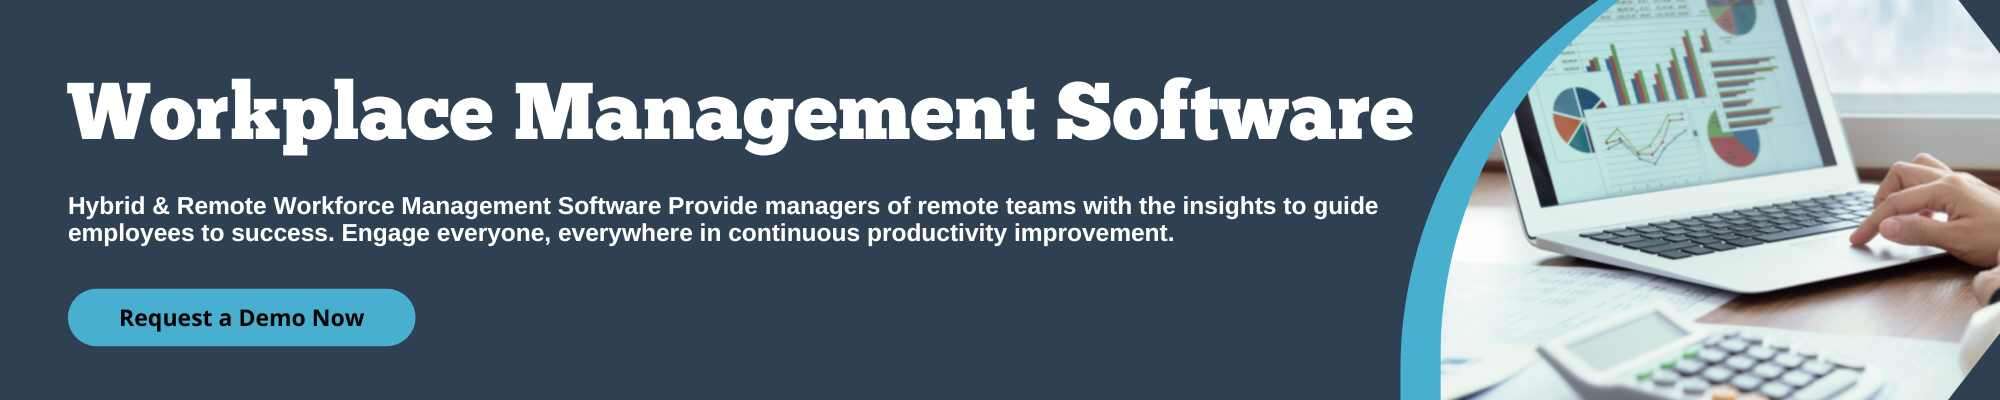 workplace management software